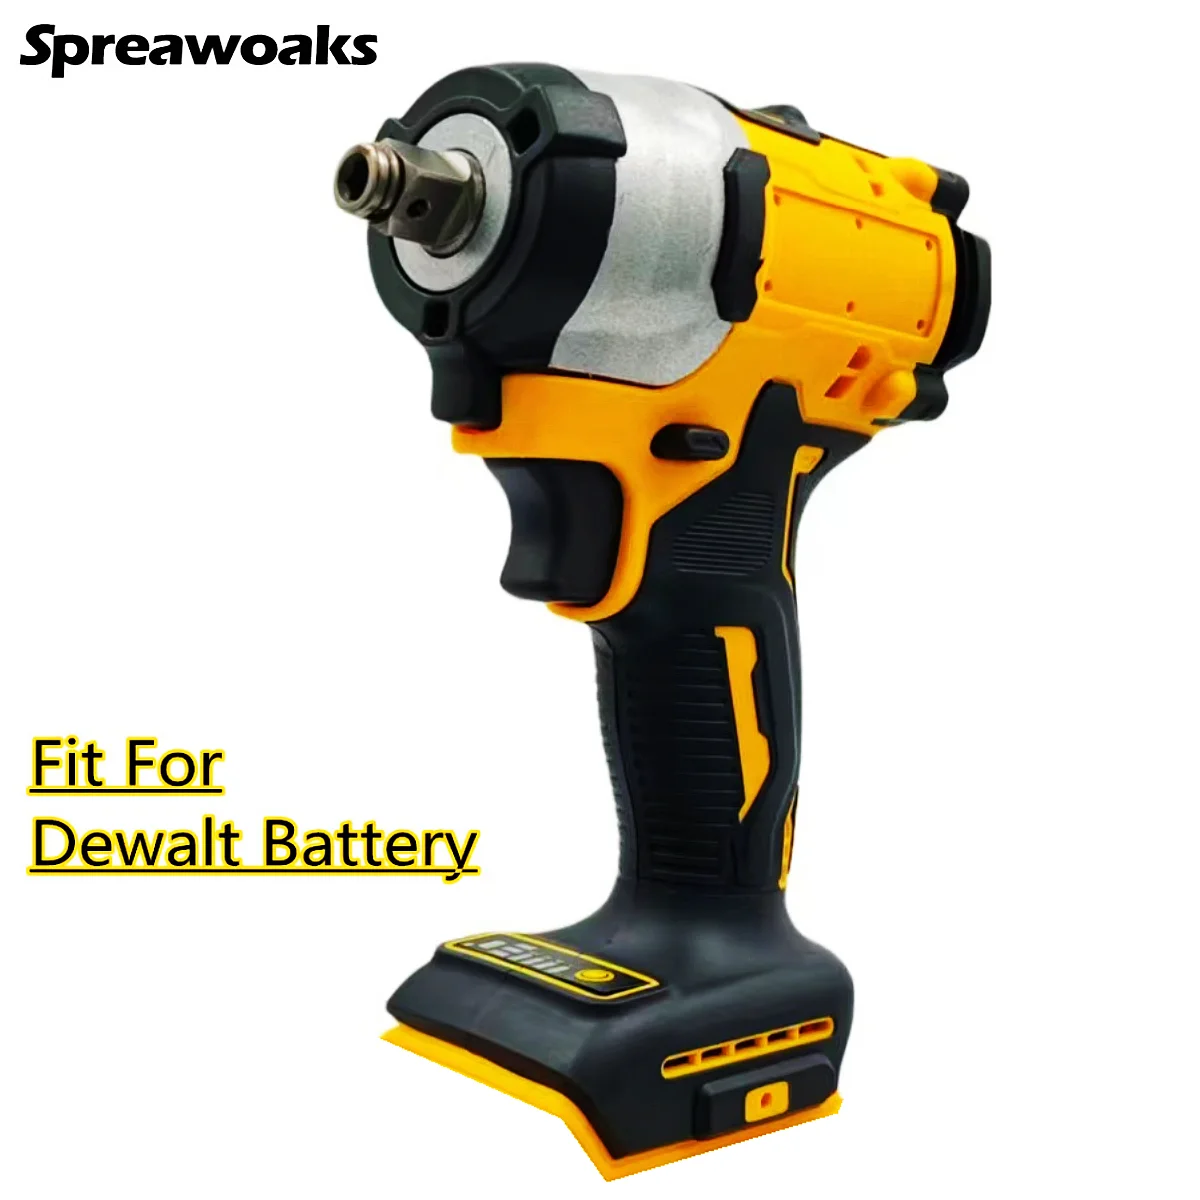 

Fit For Dewalt 18V 20V Battery Brushless Impact Wrench Electric Screwdriver 500N.M 2-in-1 Cordless Driver Repair Power Tools